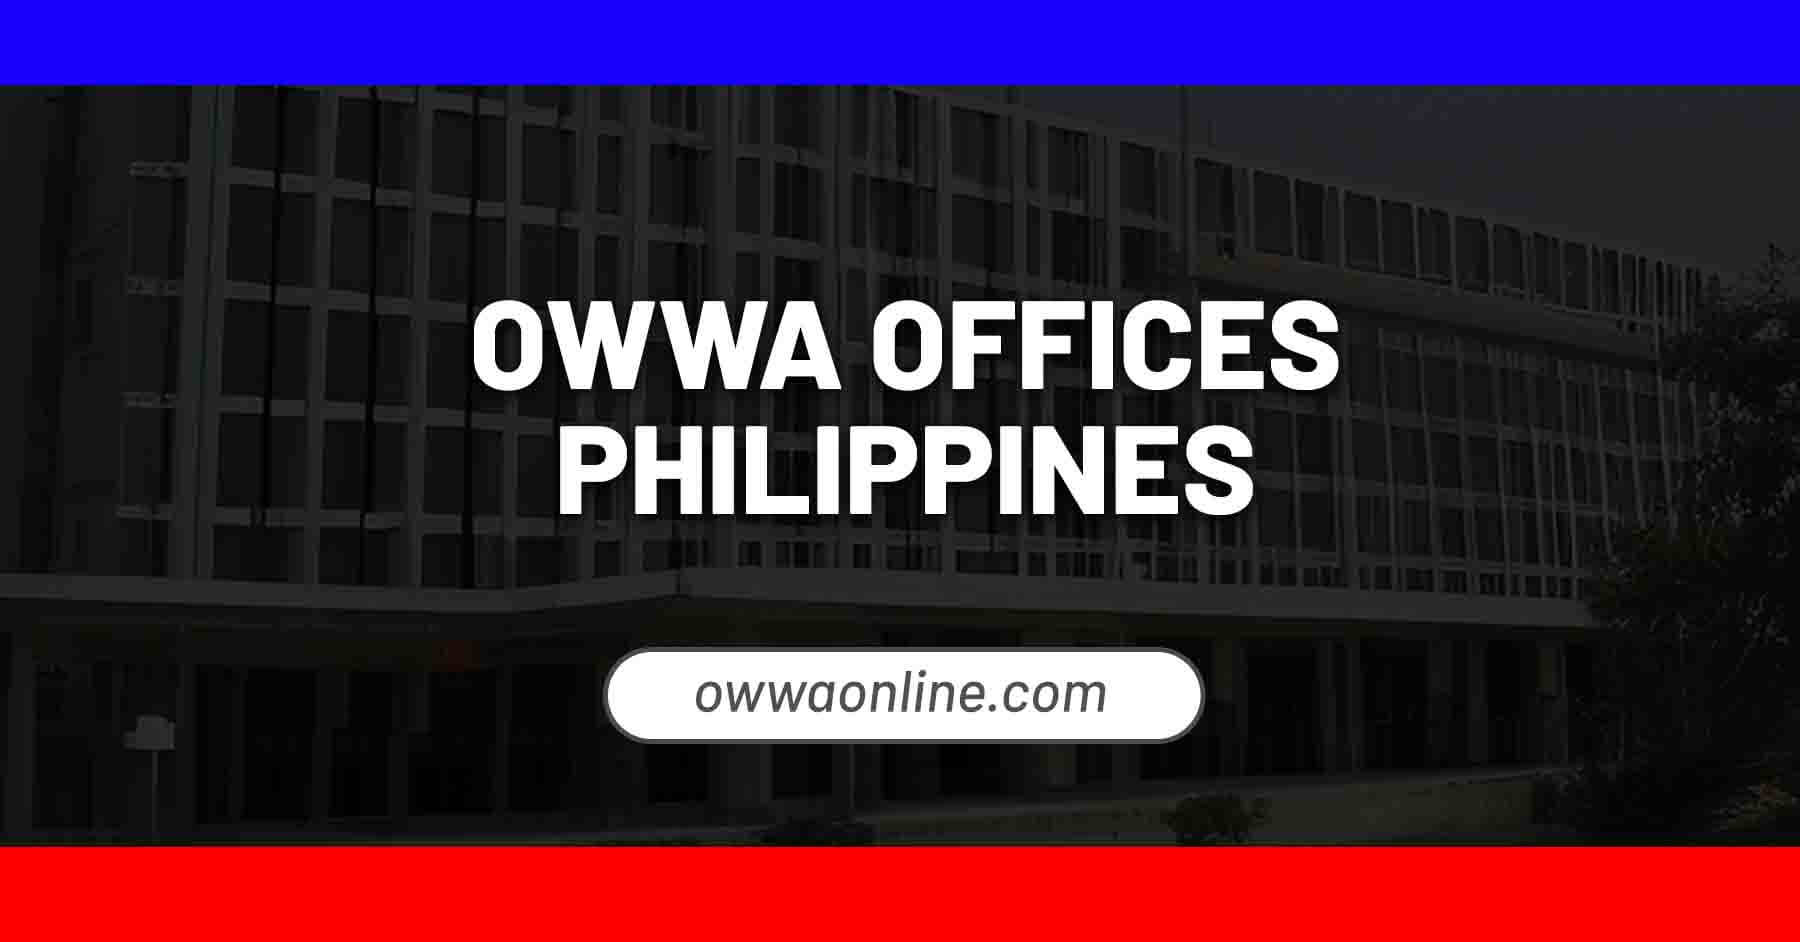 owwa regional offices in the philippines